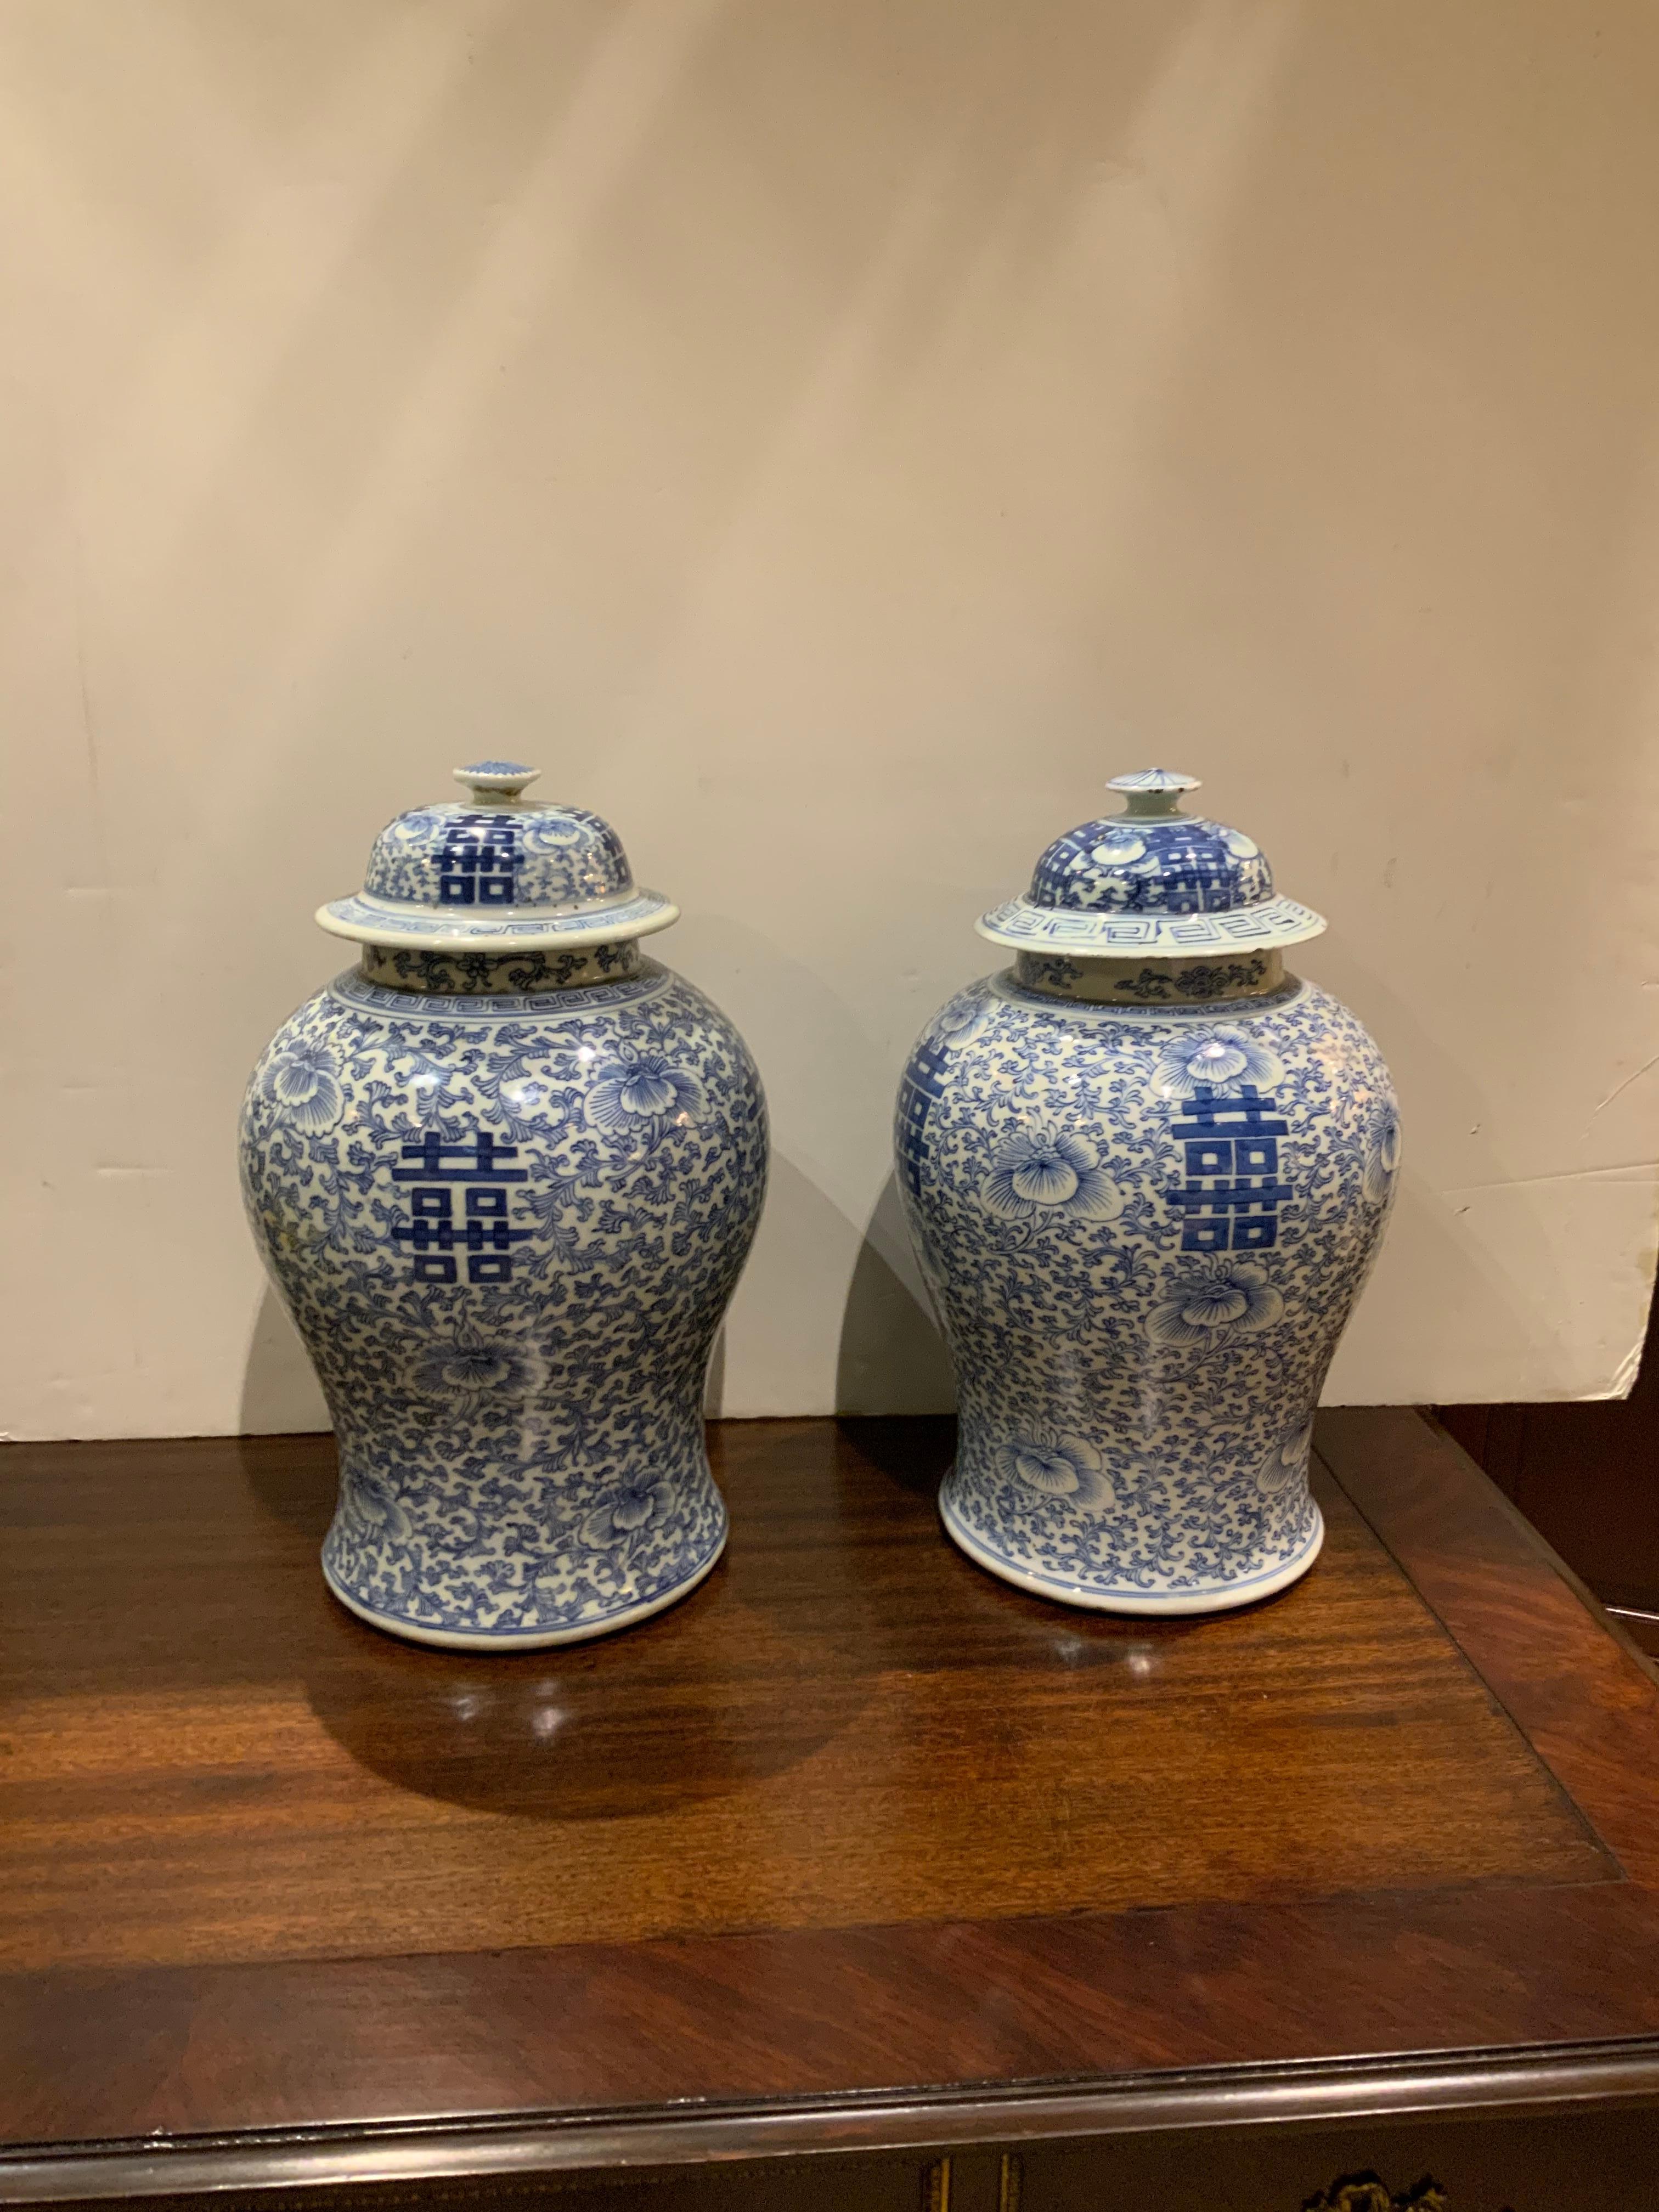 This pair is very old from the Ching Wang Shu XIX Dynasty 
And the color is exquisite. They are in good condition with only
A few flea bite tiny chips on the under side of the lids, they are
Imperceptible from the top side. They have vine type